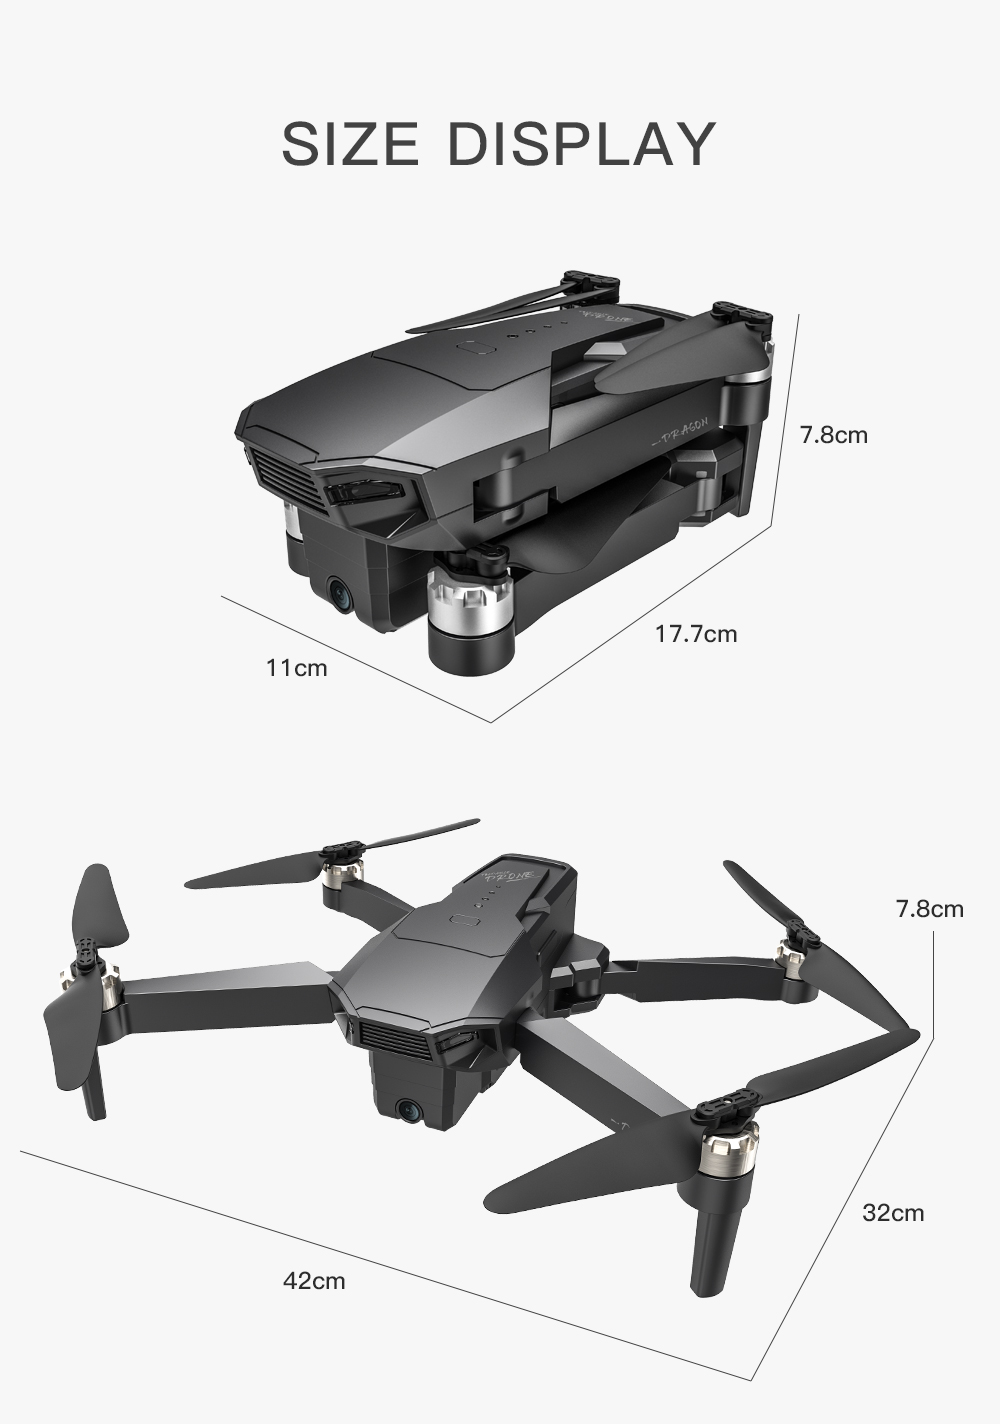 KF107-GPS-5G-WiFi-12KM-FPV-with-4K-Servo-Camera-Optical-Flow-Positioning-Brushless-Foldable-RC-Drone-1740852-32